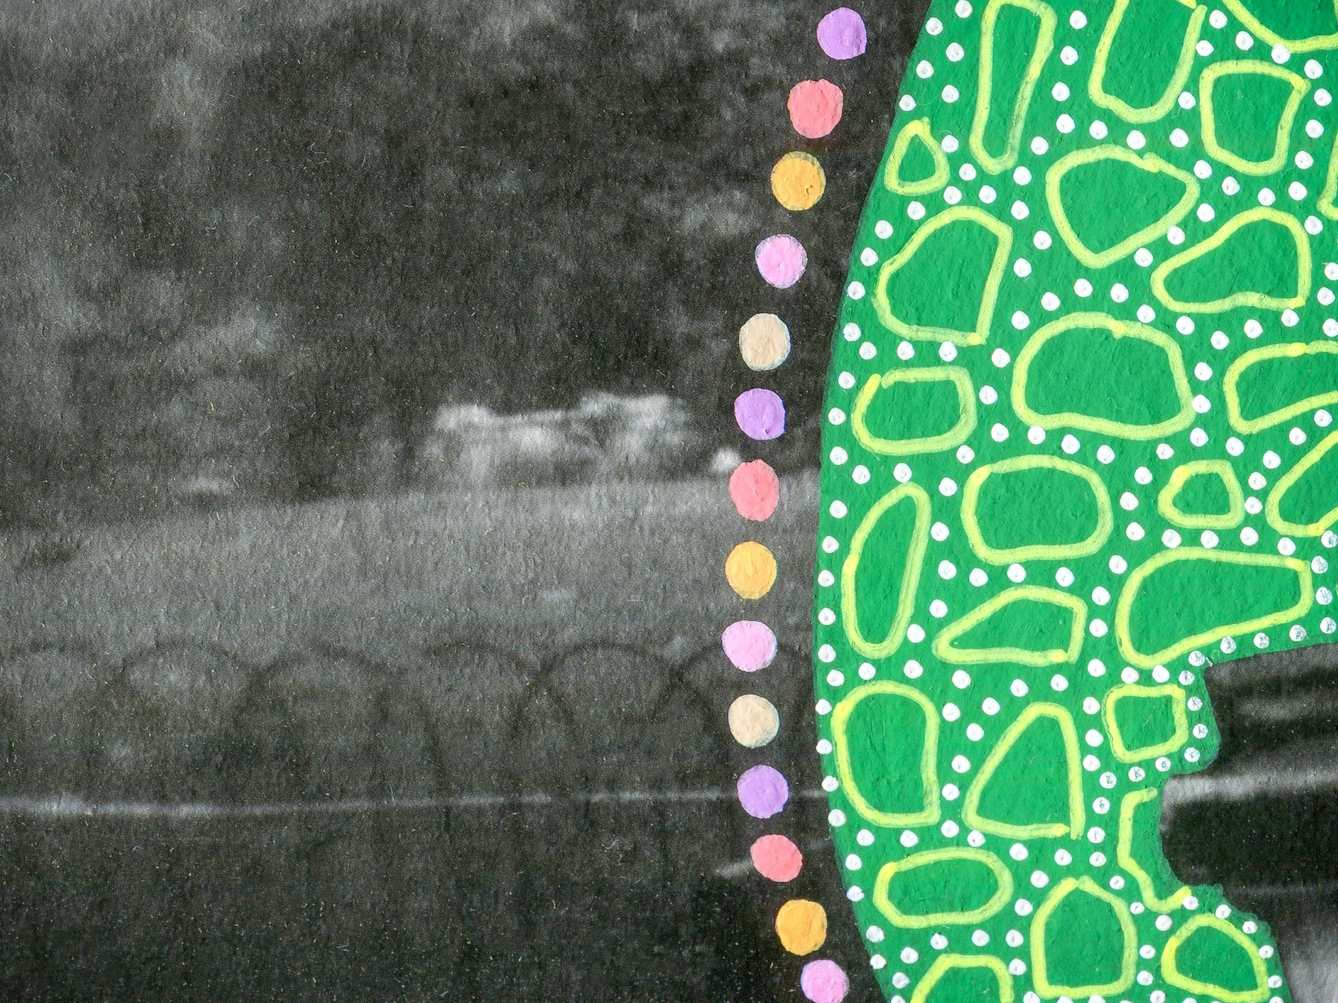 Artwork created by painting over the surface of a black and white photographic print with colourful paint. The artwork shows the original scene of a parkland scene with a black hooped fence separating the path from the planted grass area. Entering the frame on the right is part of a large oval shape painted green, which is covered in small lighter green dots and many organic shaped circular light green outlines. Around the edge of the oval shape are a line of coloured painted spots, of yellow, pink and purple. The texture of the paint can be seen on the surface of the print.